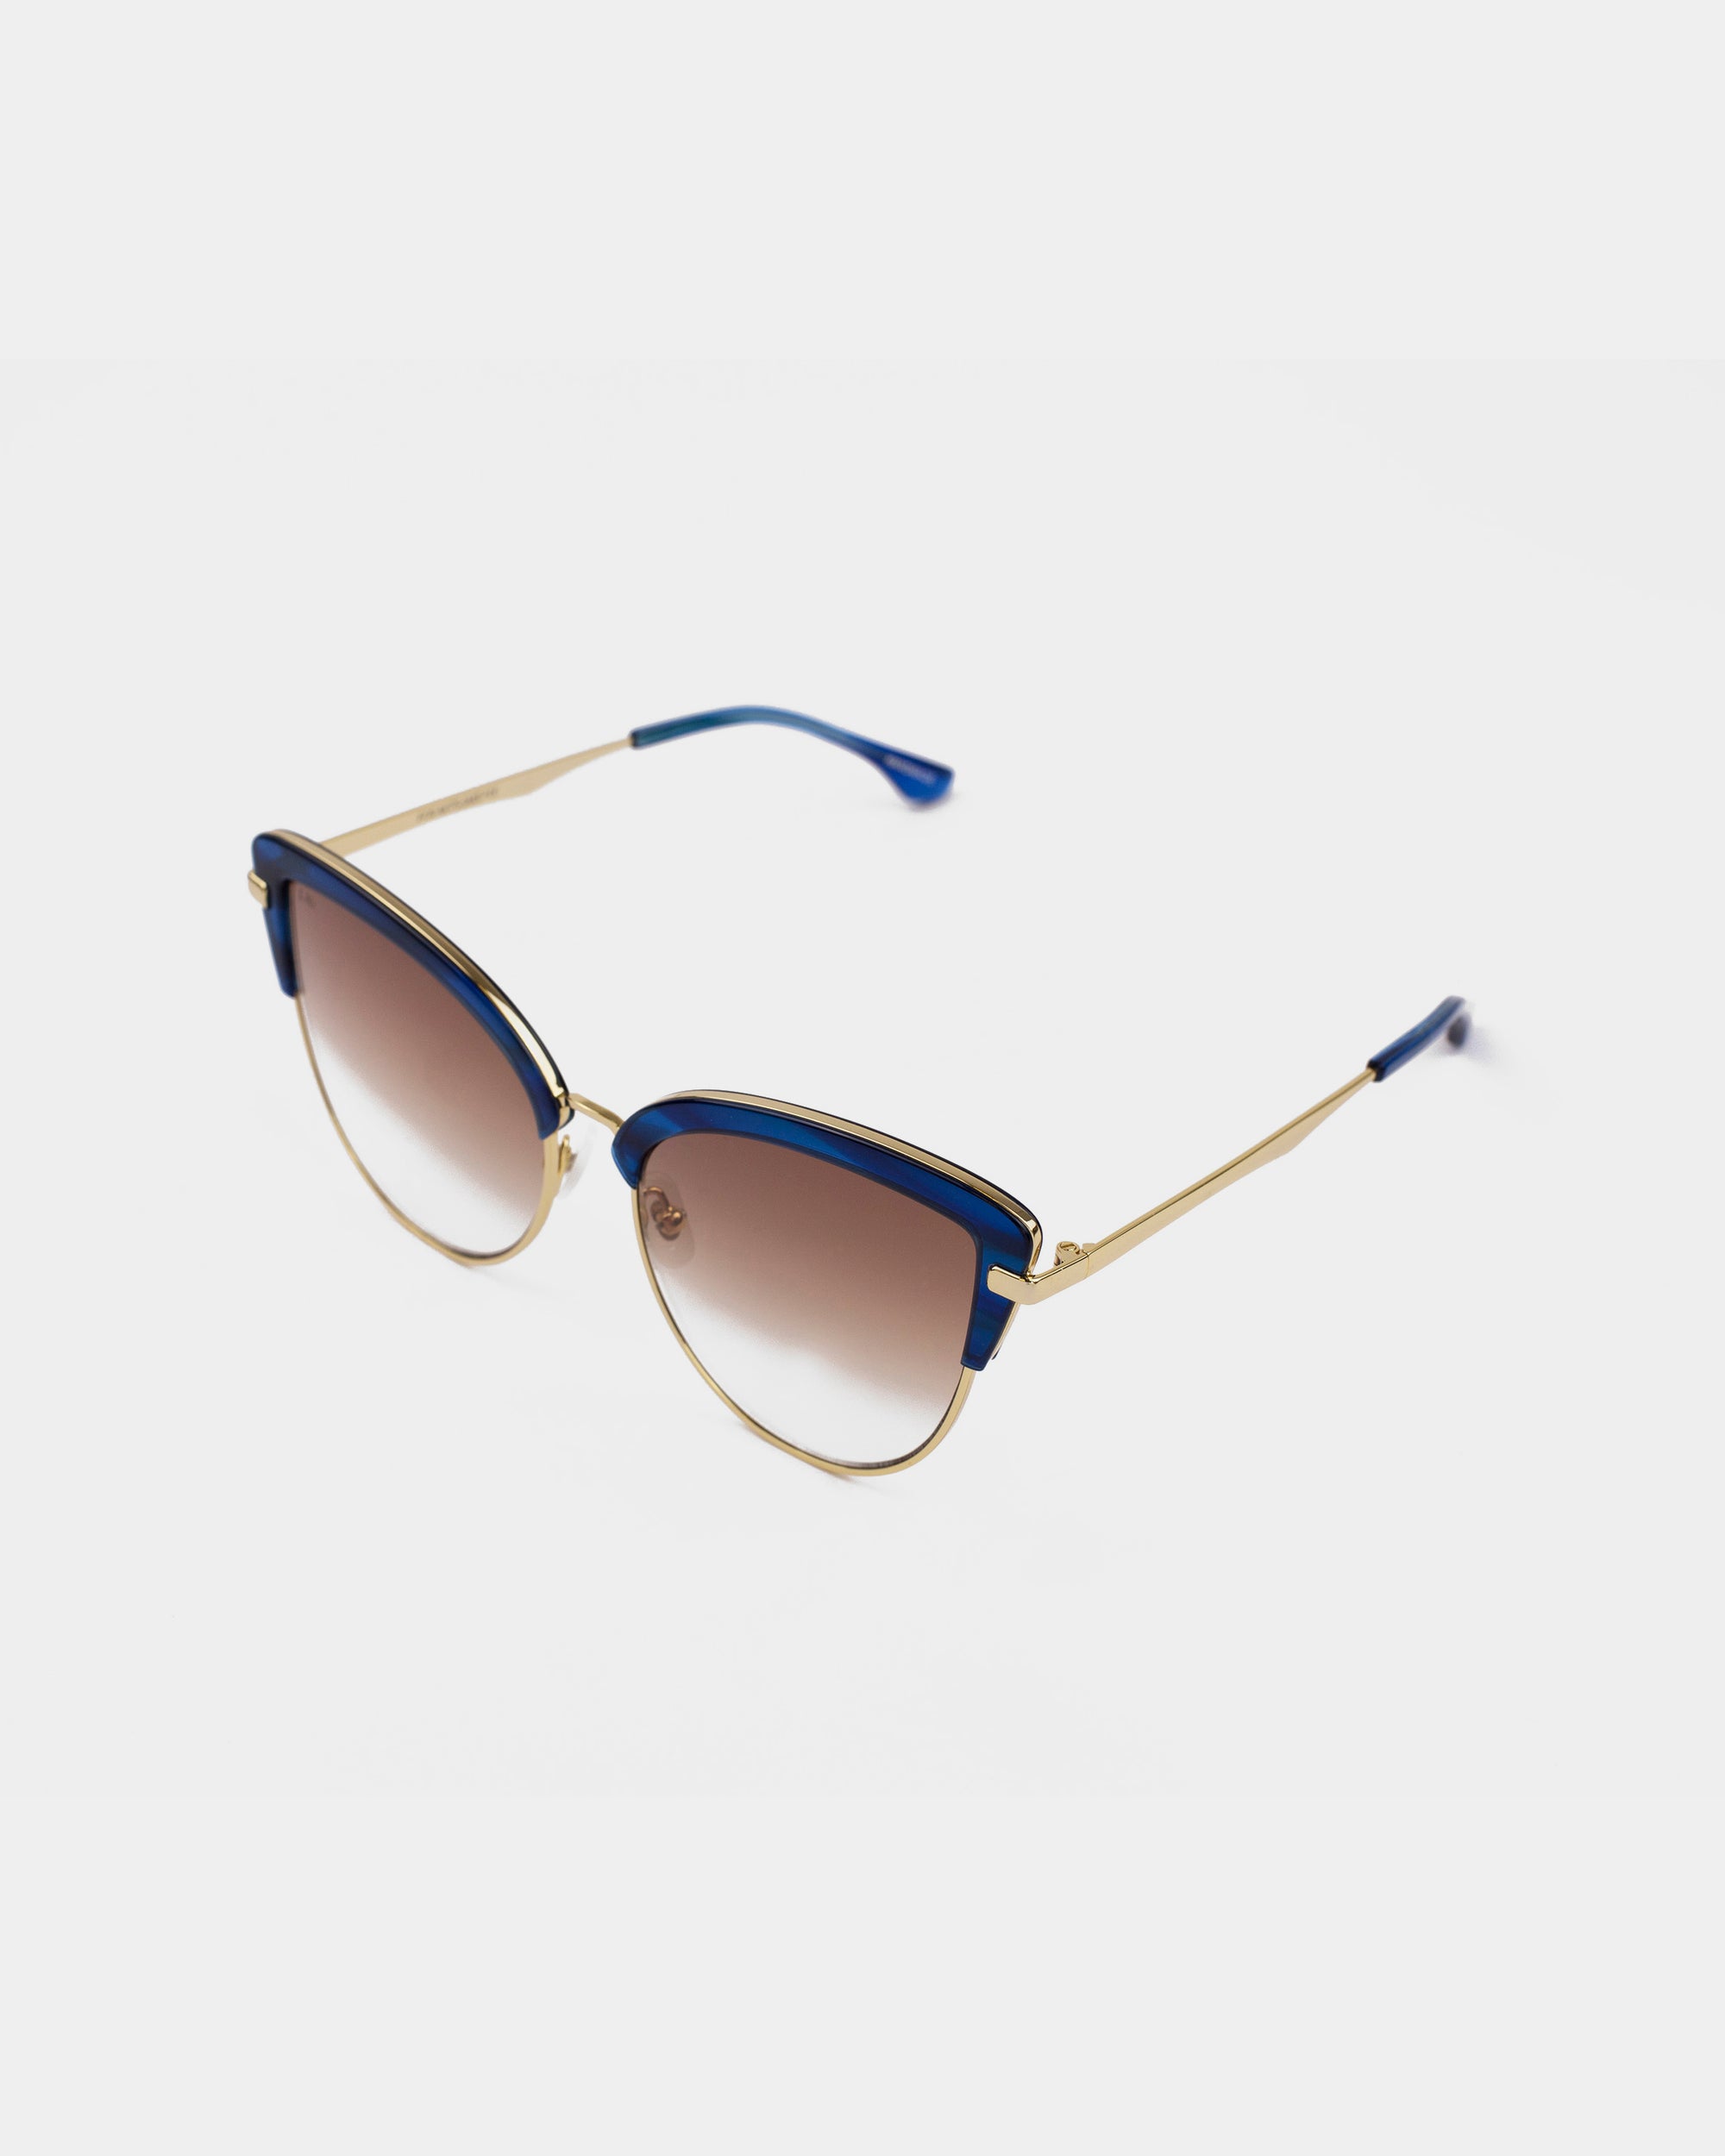 A pair of stylish Venus sunglasses by For Art&#39;s Sake® featuring stainless steel frames with 18-karat gold plating, blue accents along the top edge, and gradient brown nylon lenses. The temple arms are gold with blue tips, giving the eyewear a fashionable and elegant look.